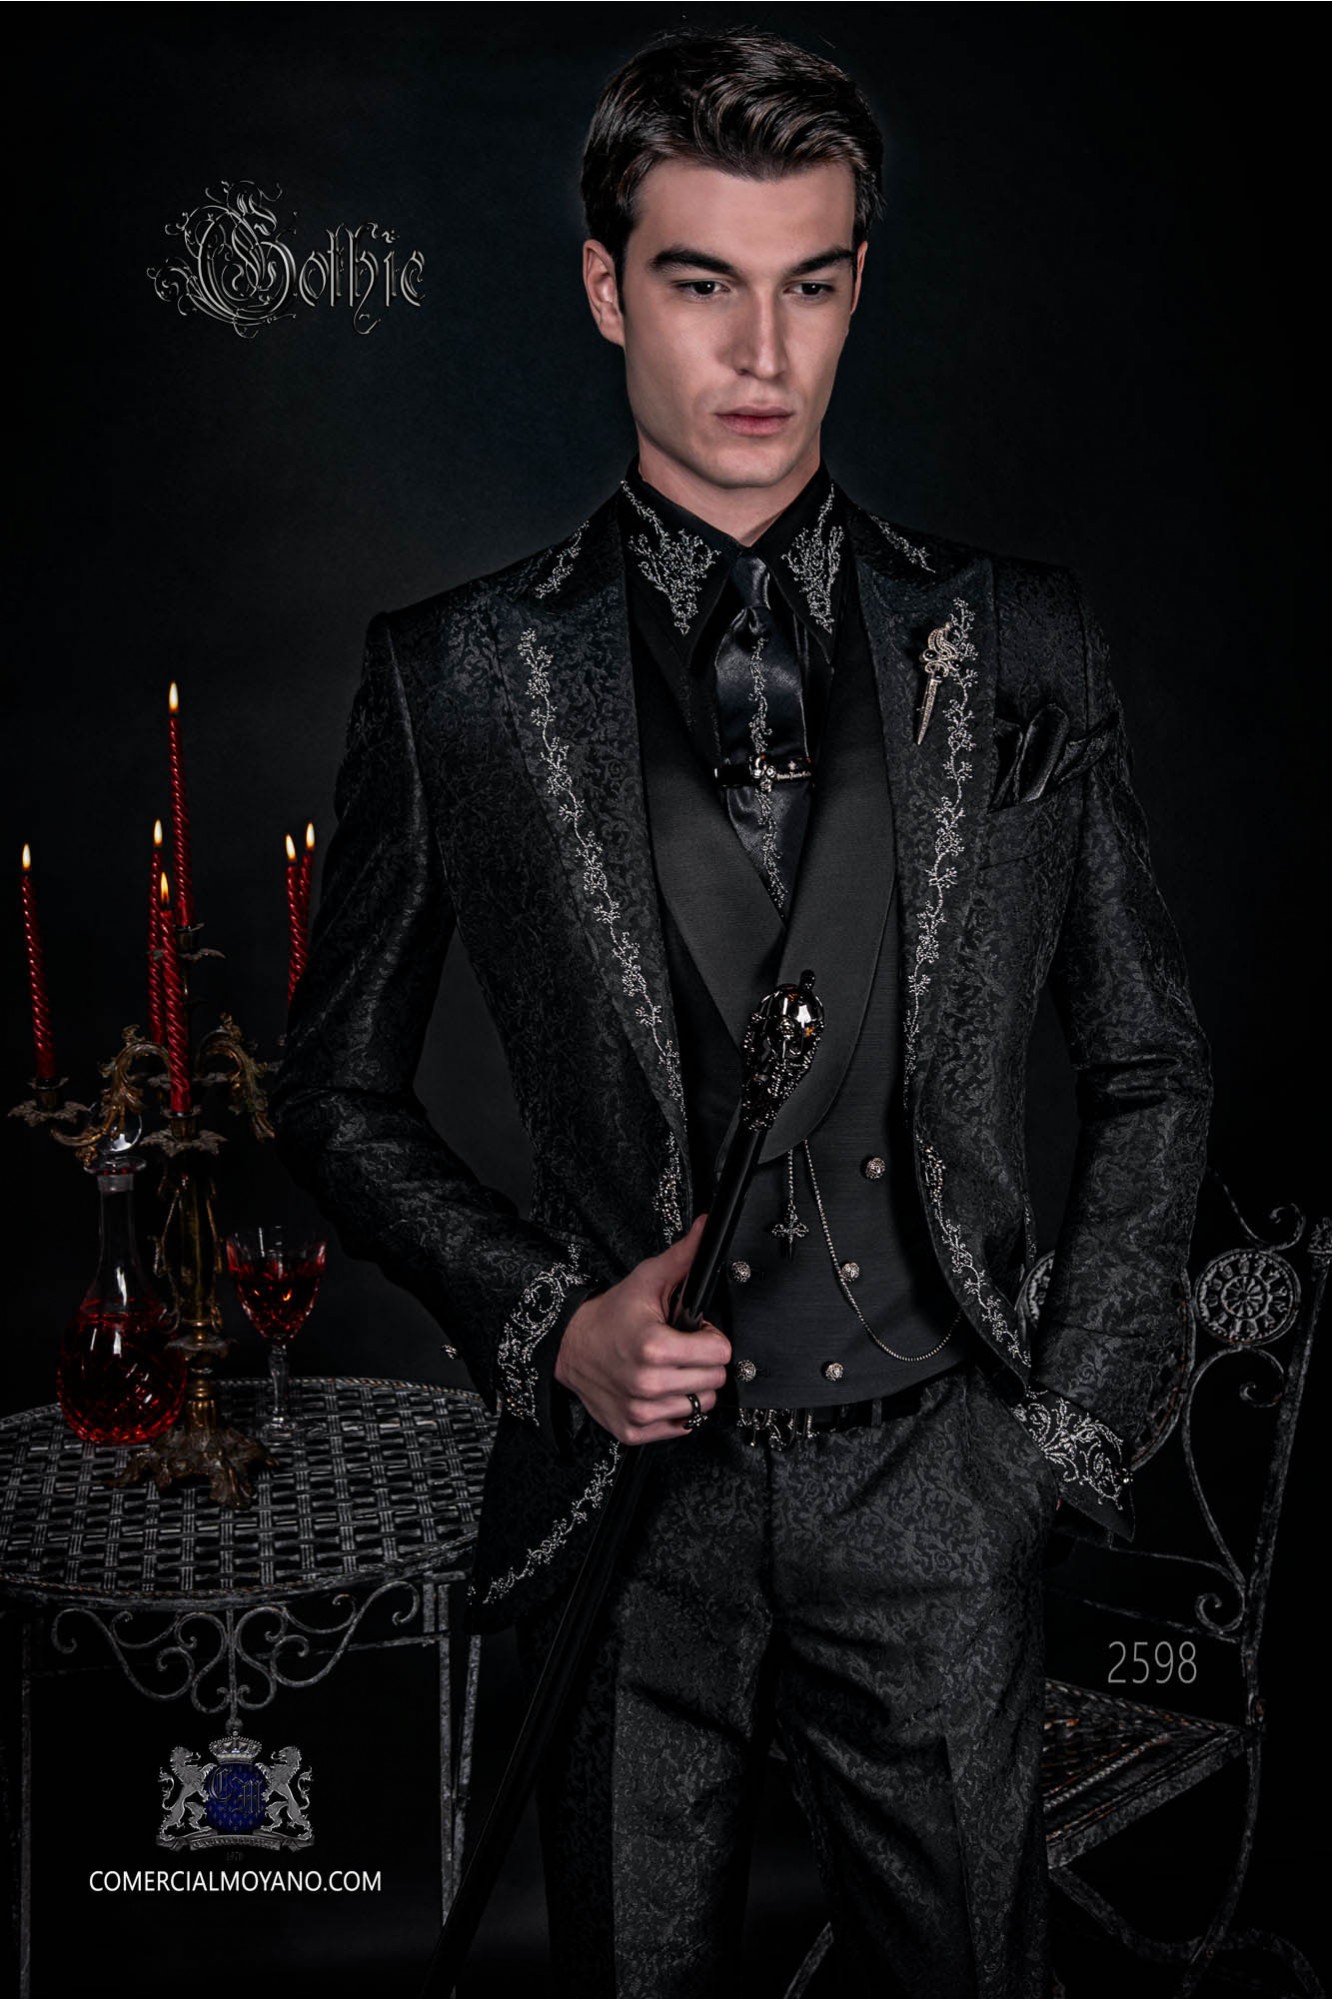 Gothic frock coat for groom black brocade with silver embroidery model 2598 Mario Moyano